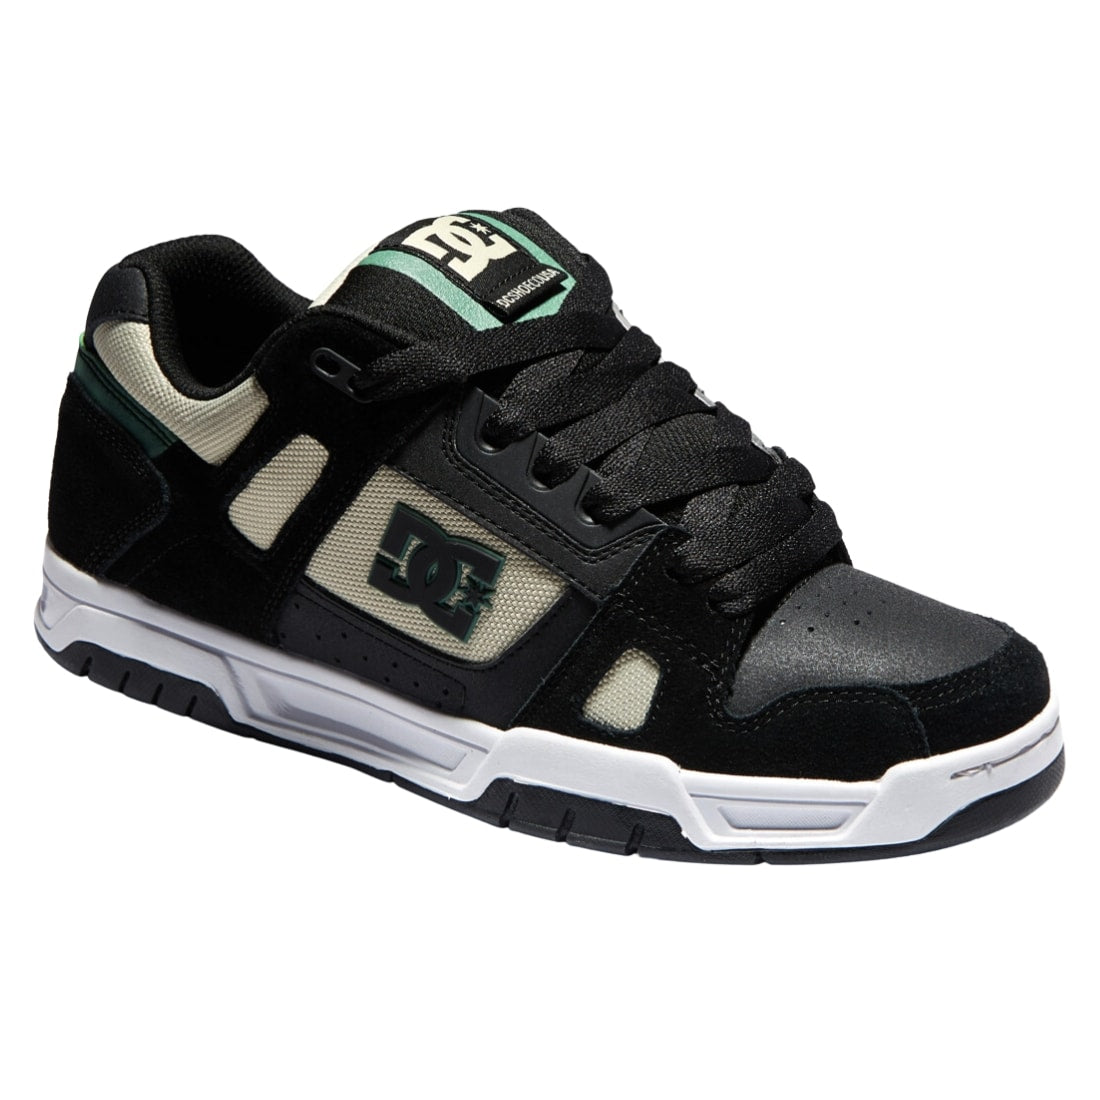 DC Stag Skate Shoes - Tan/Green